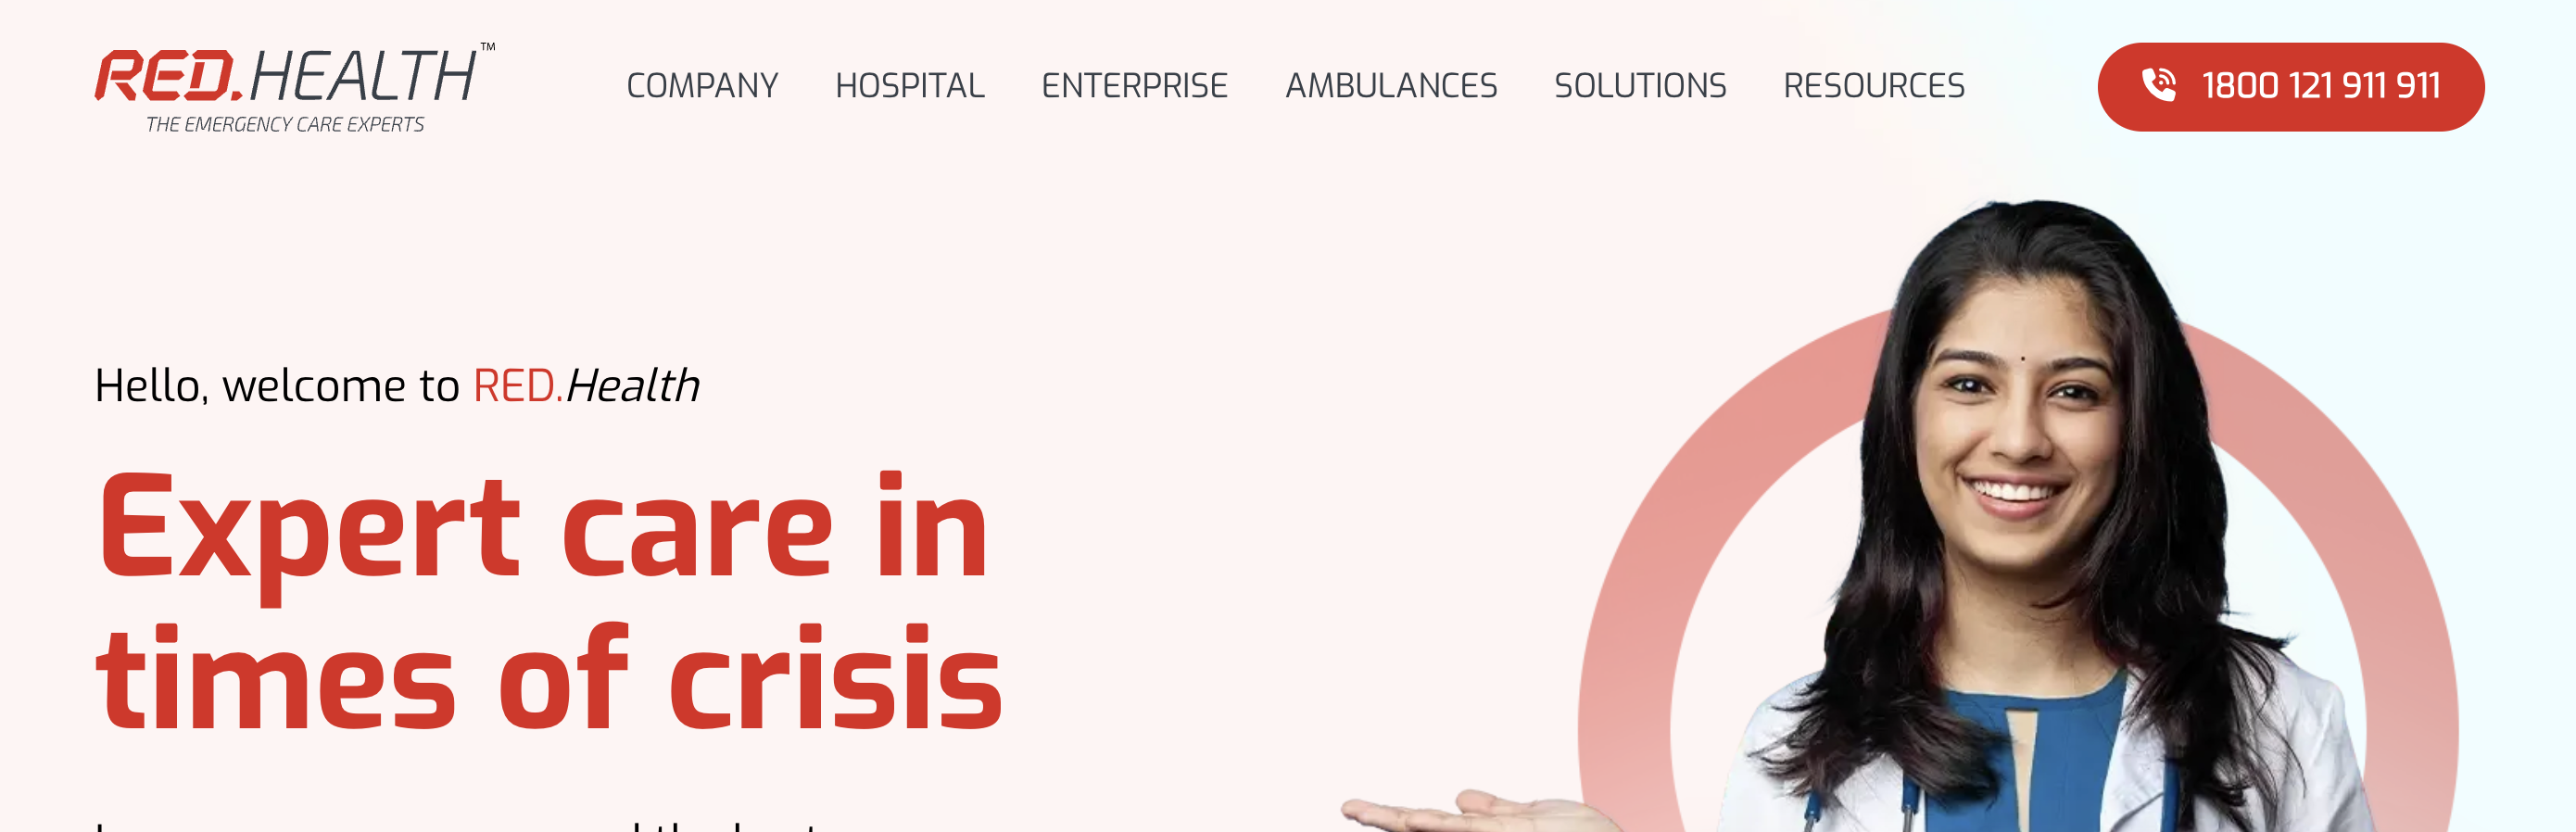 RED.Health Accelerates Healthcare Emergency Response with $20 Million Funding